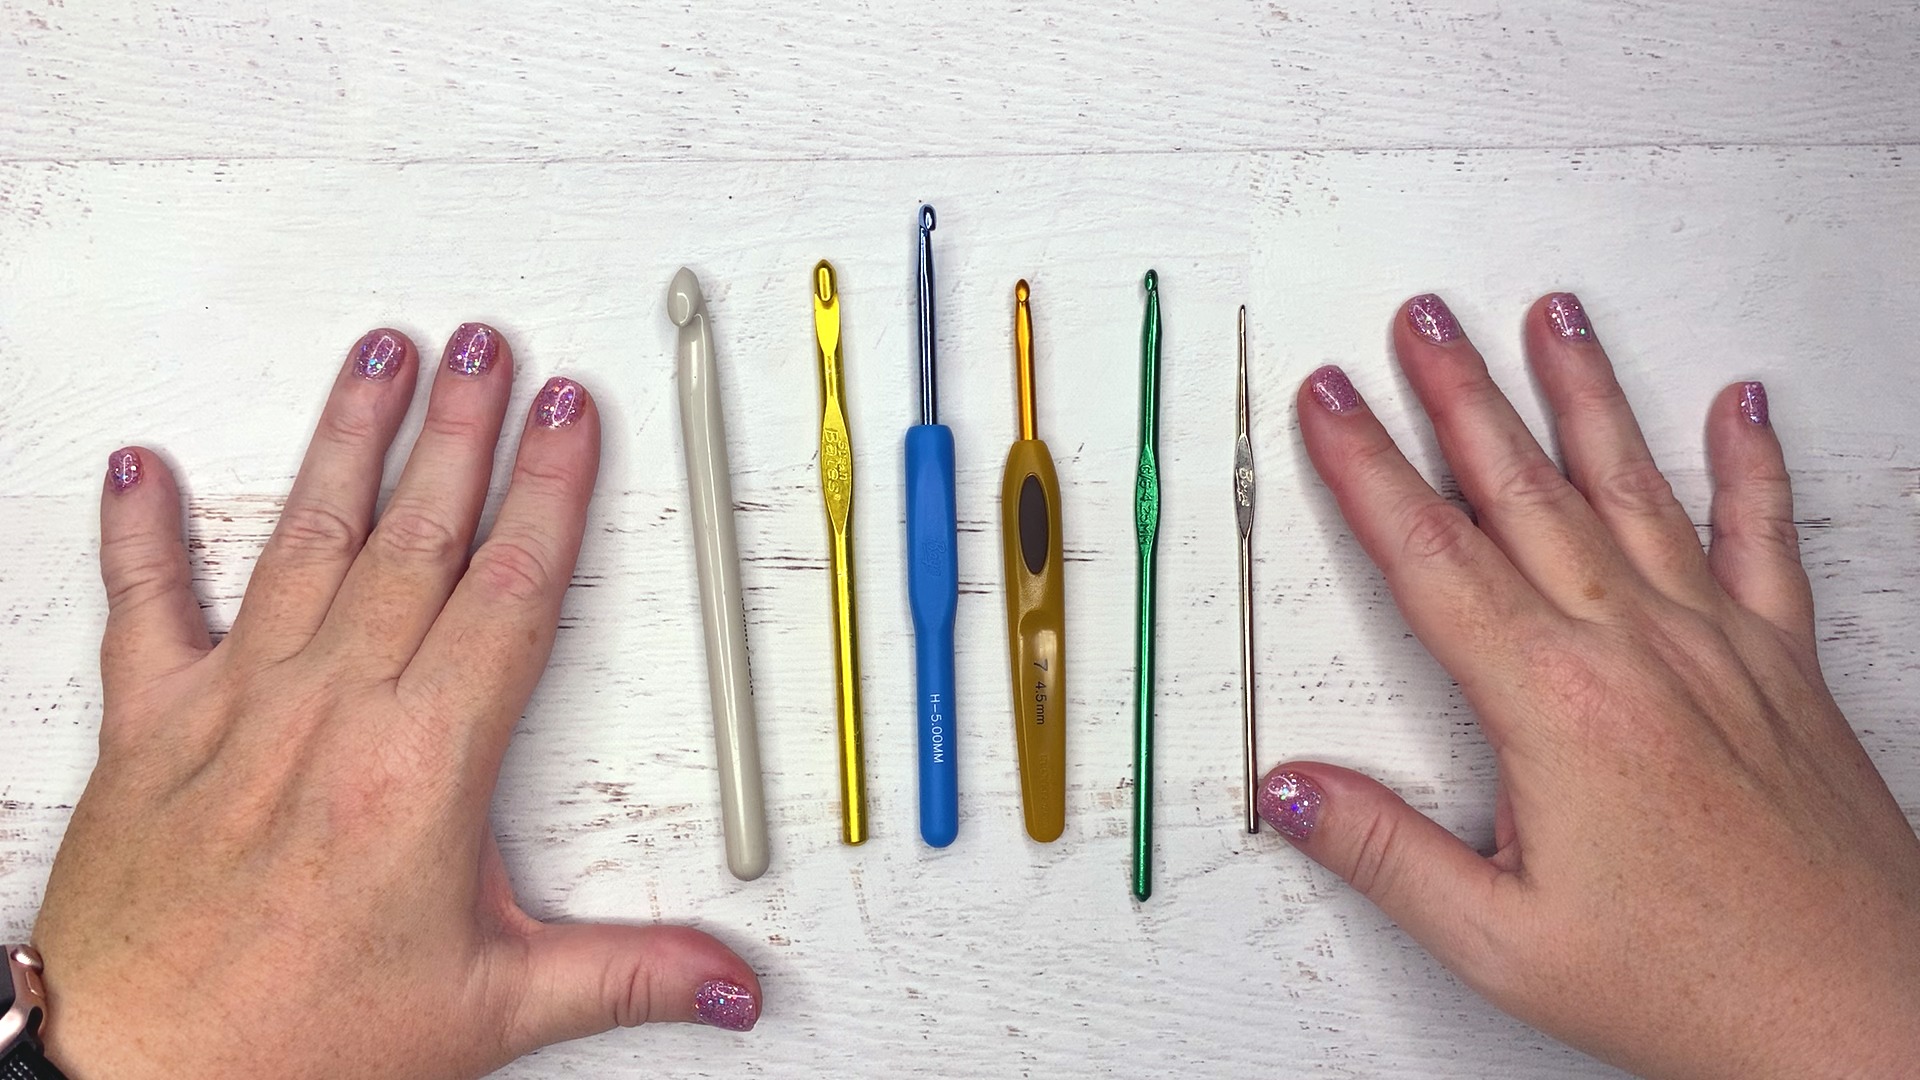 6 Ways to Hold a Crochet Hook - wikiHow